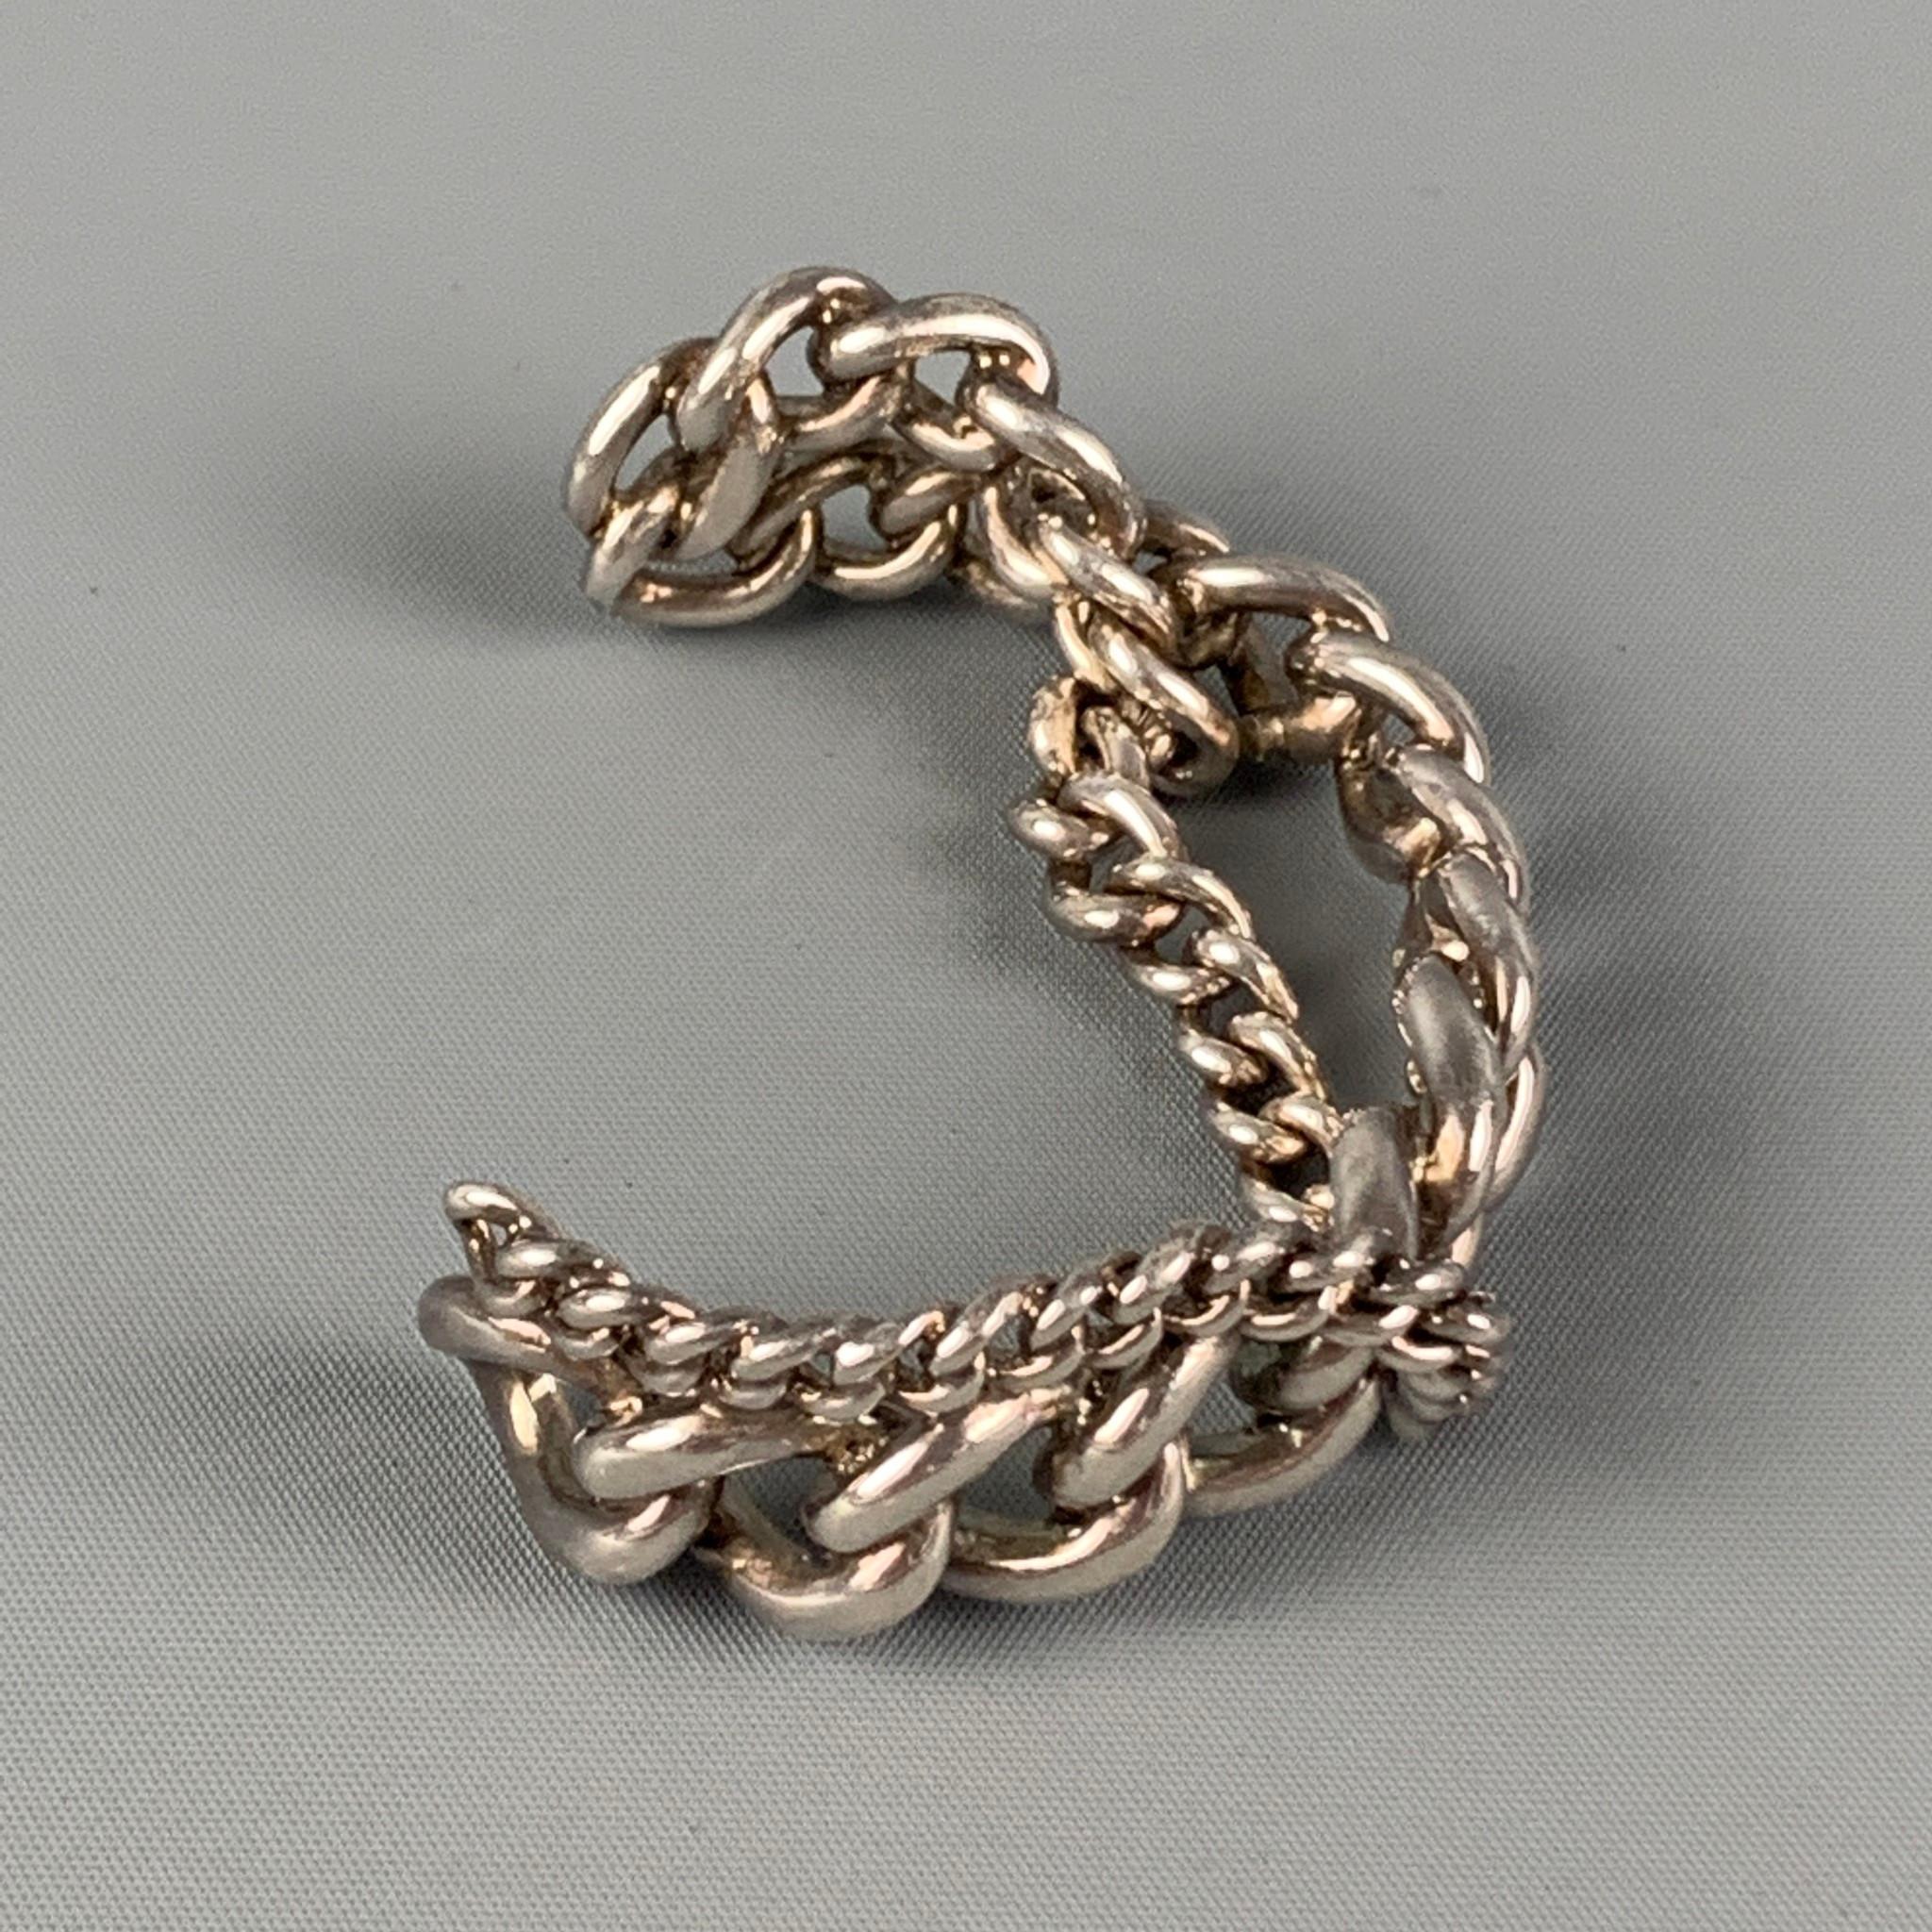 GAULTIER cuff bracelet comes in a silver tone chain link metal. 

Very Good Pre-Owned Condition. 

Measurements:

Width: 0.75 in.
Fits: 2.75 in. 